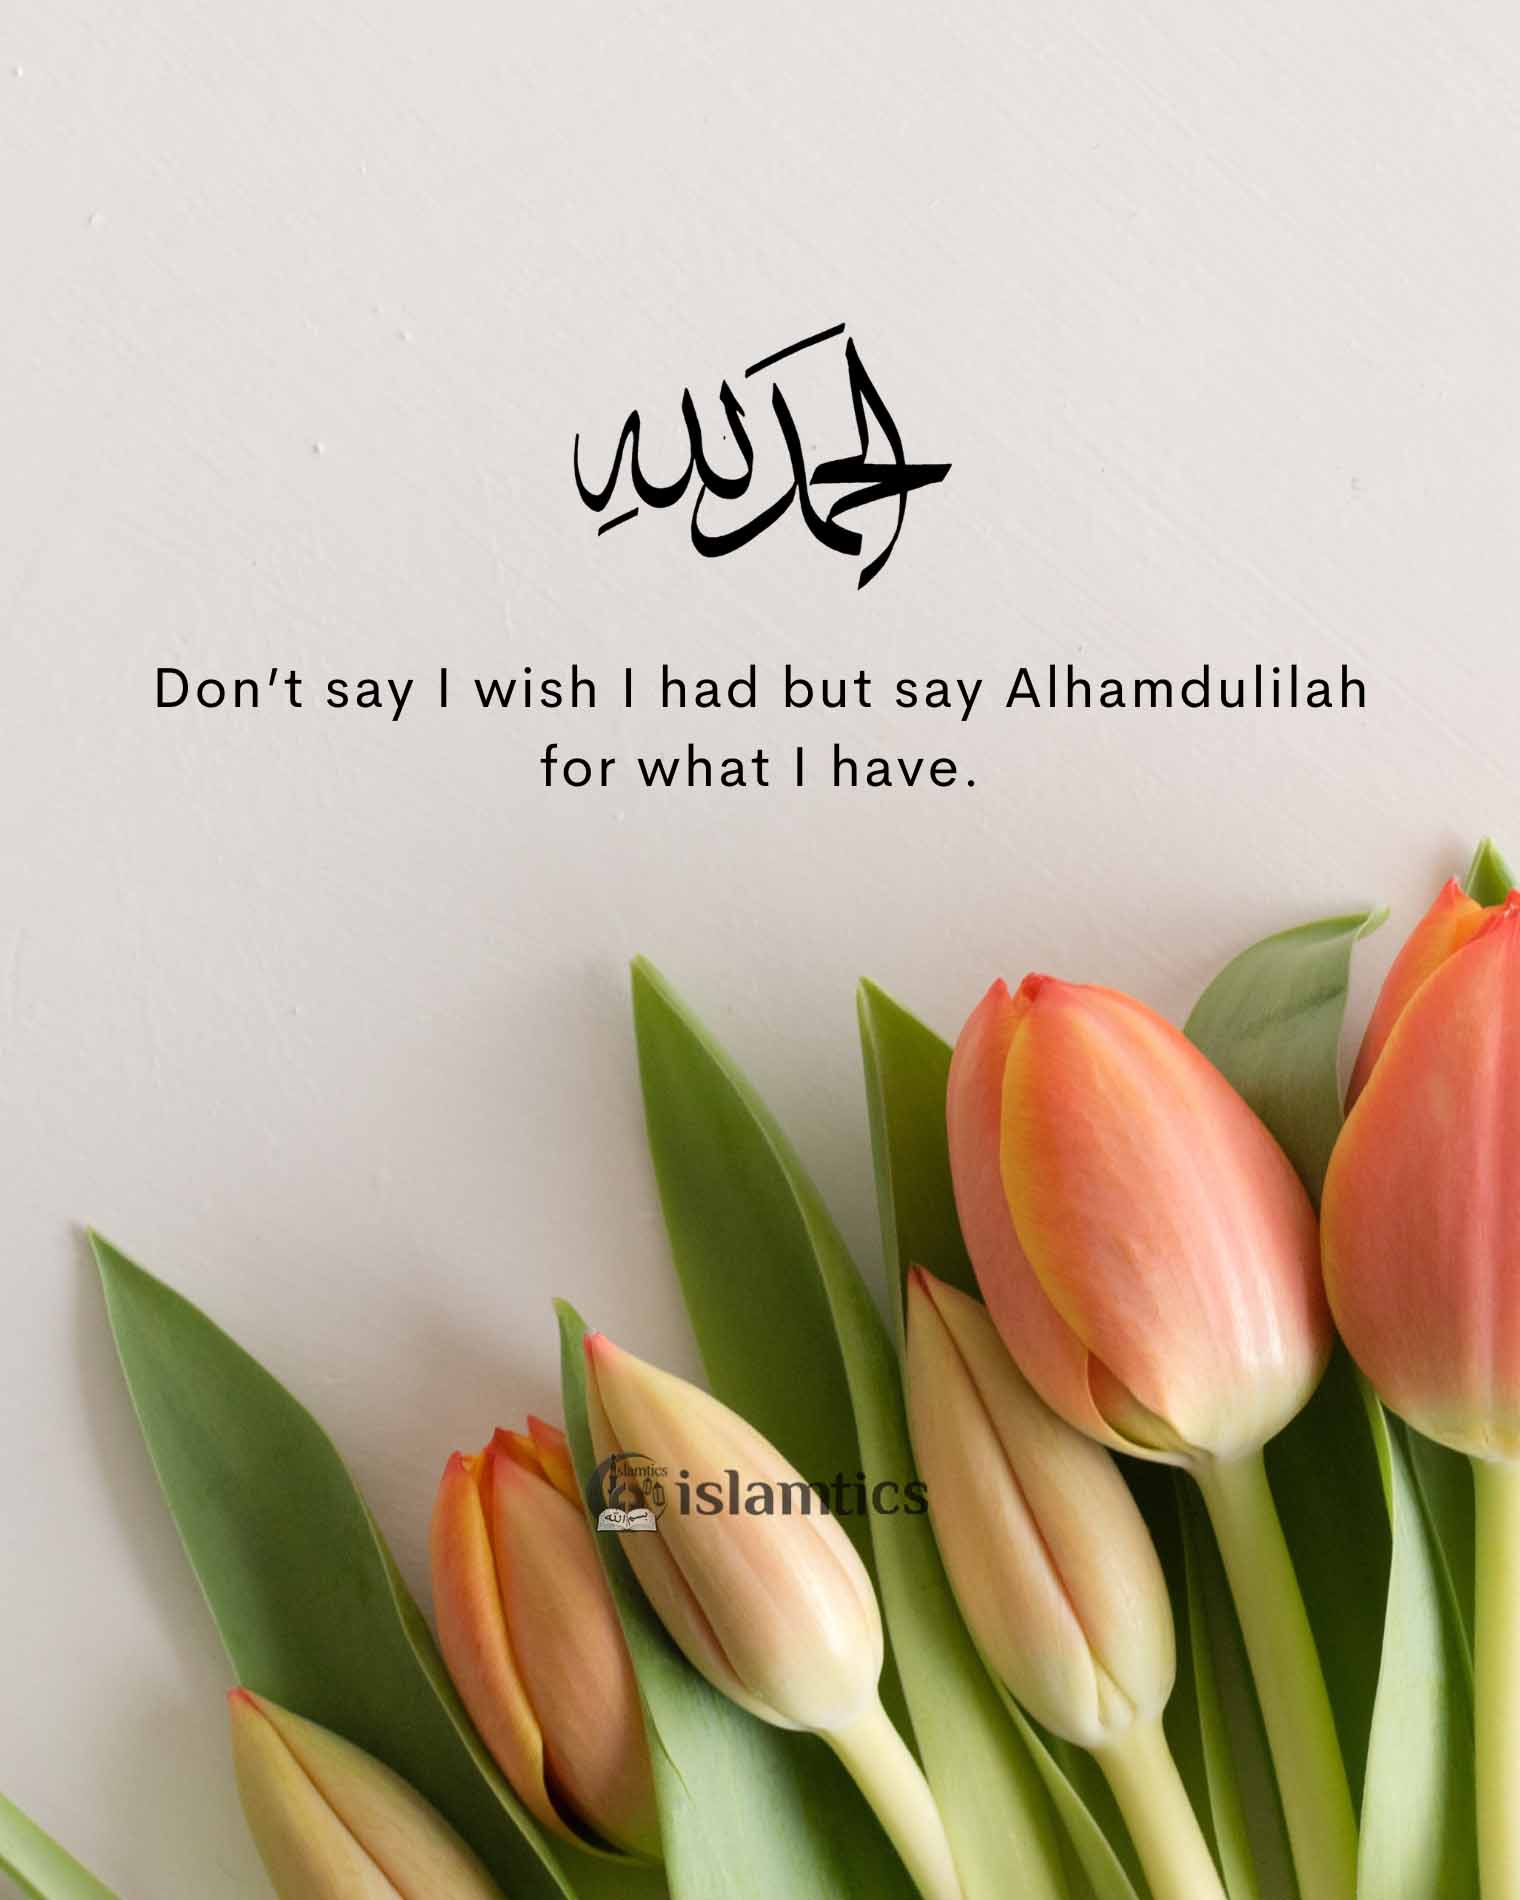  Don’t say I wish I had but say Alhamdulilah for what I have.